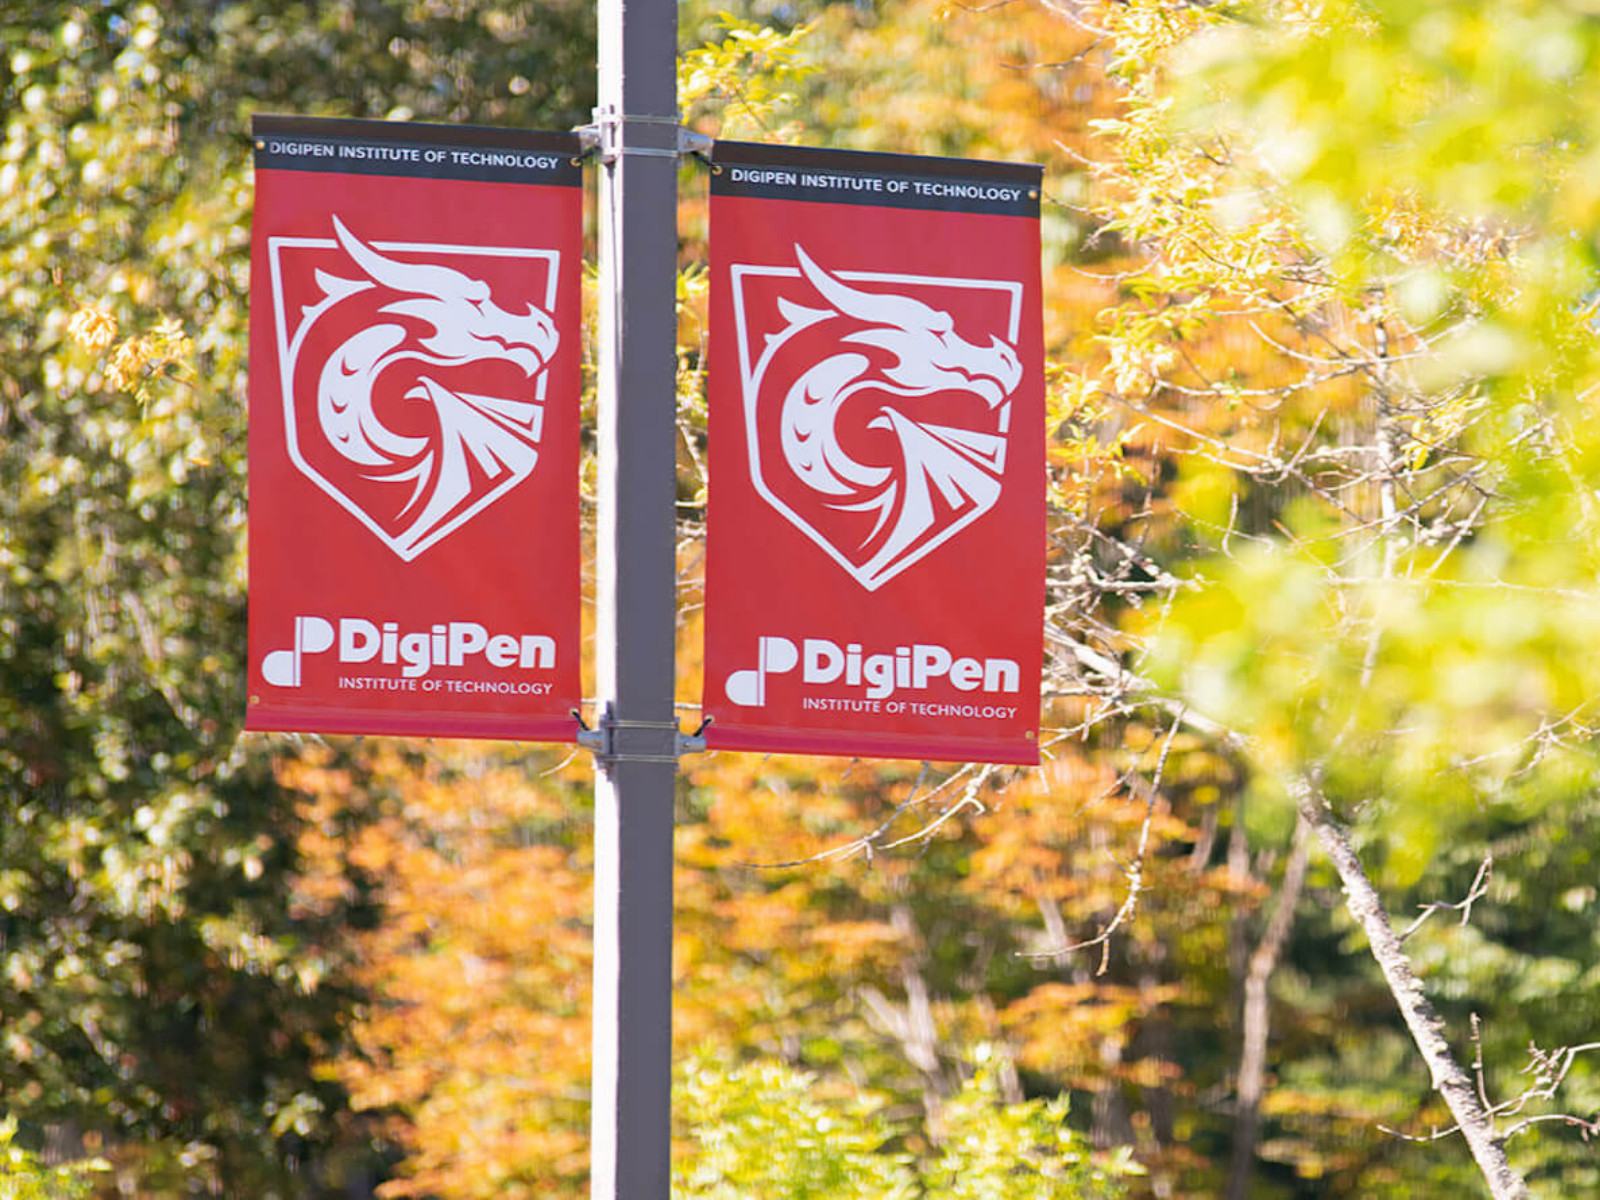 Two DigiPen banners on pole set against fall scenery